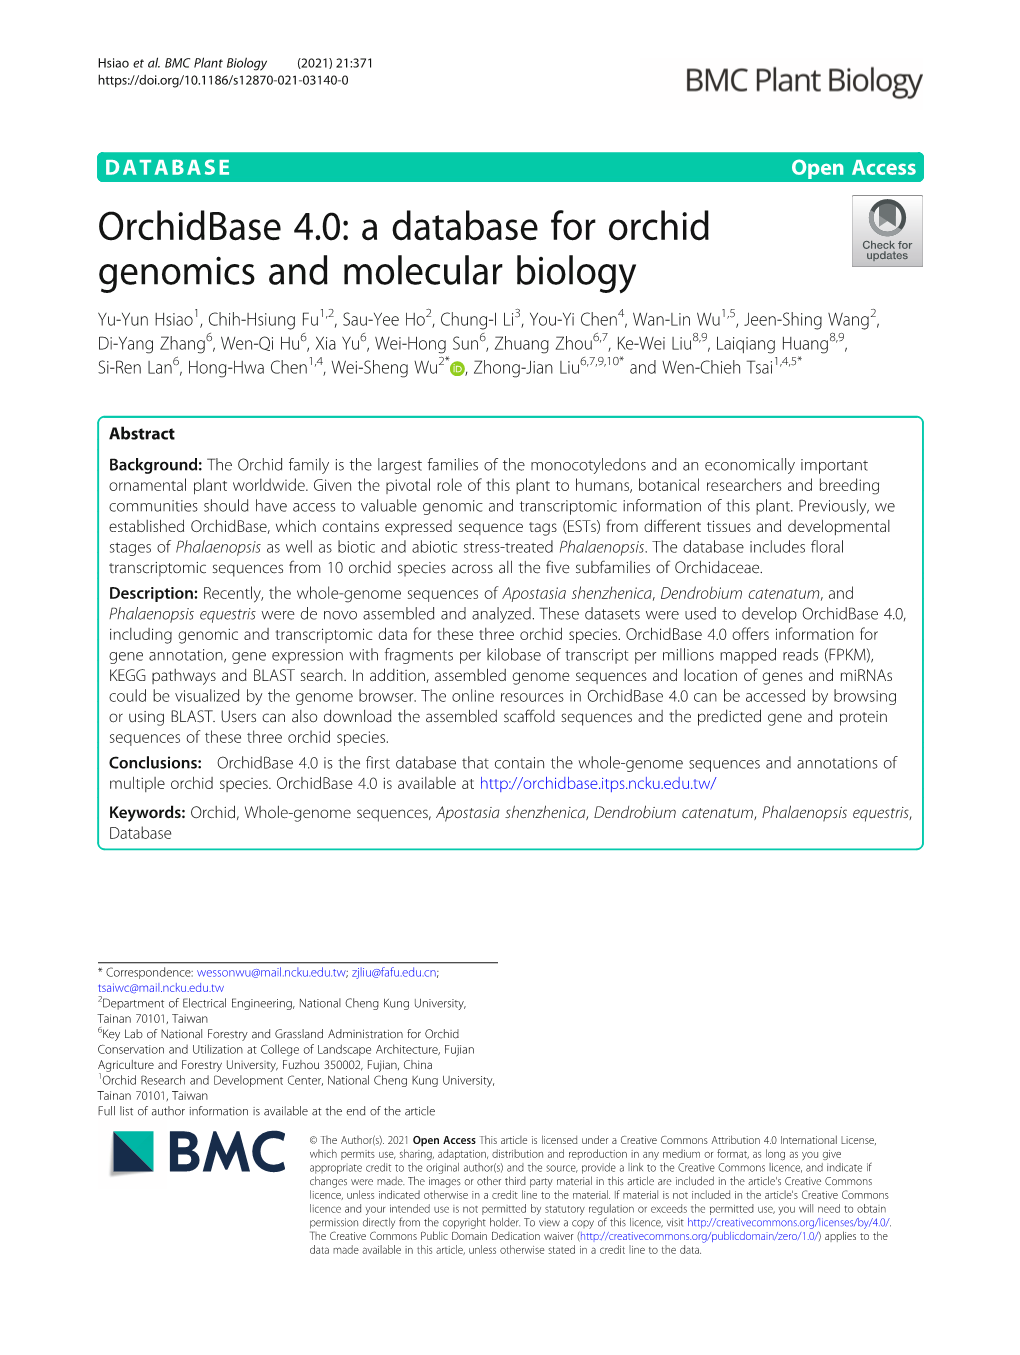 A Database for Orchid Genomics and Molecular